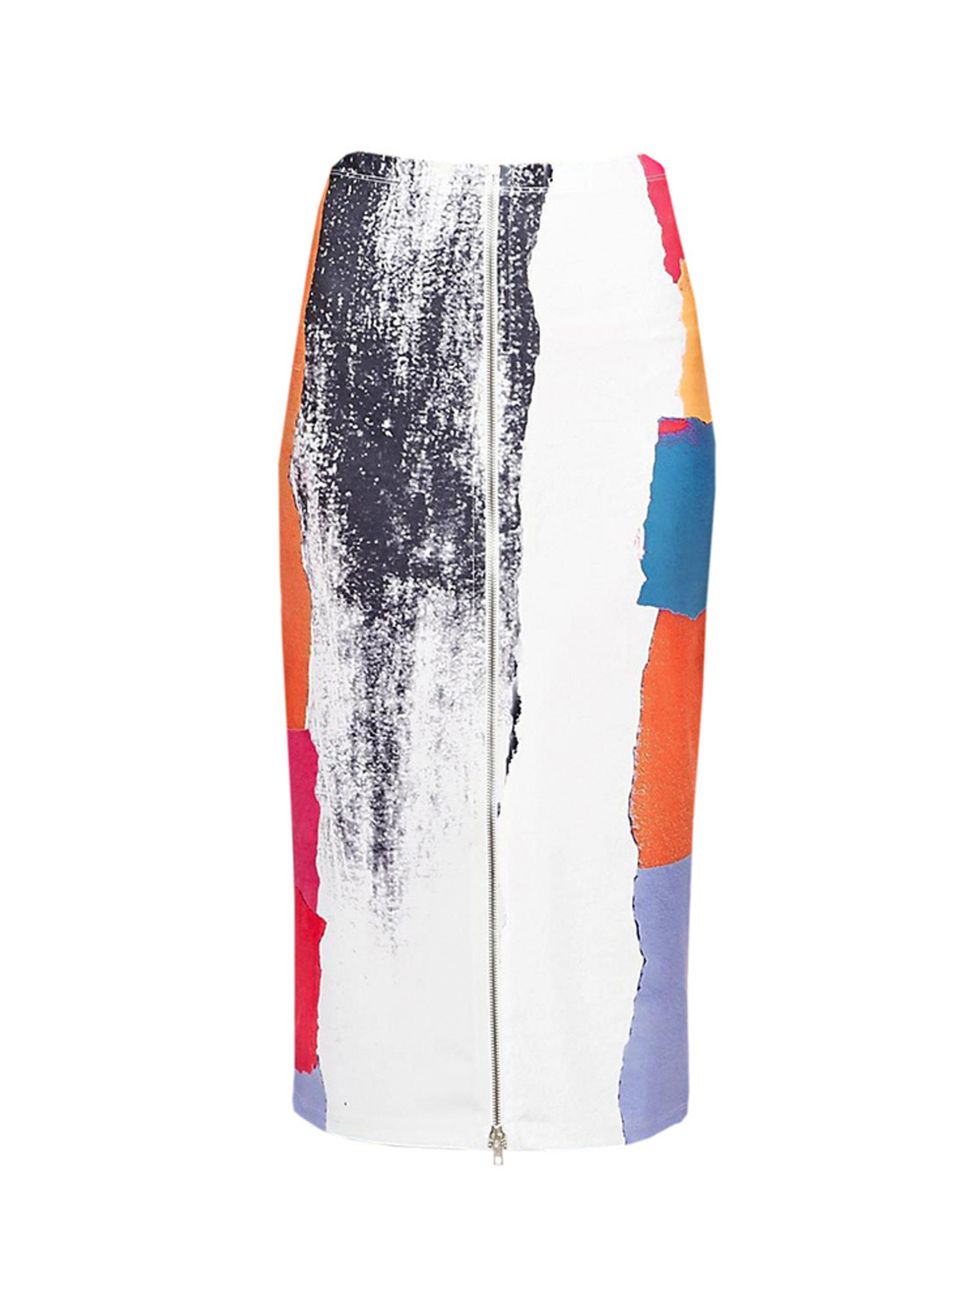 <p><a href="http://www.asos.com/ASOS/ASOS-Abstract-Brush-Stroke-Zip-Front-Neoprene-Pencil-Skirt/Prod/pgeproduct.aspx?iid=5356871&cid=2639&sh=0&pge=0&pgesize=36&sort=-1&clr=Multi&totalstyles=738&gridsize=3" target="_blank">ASOS</a> skirt, £35</p>